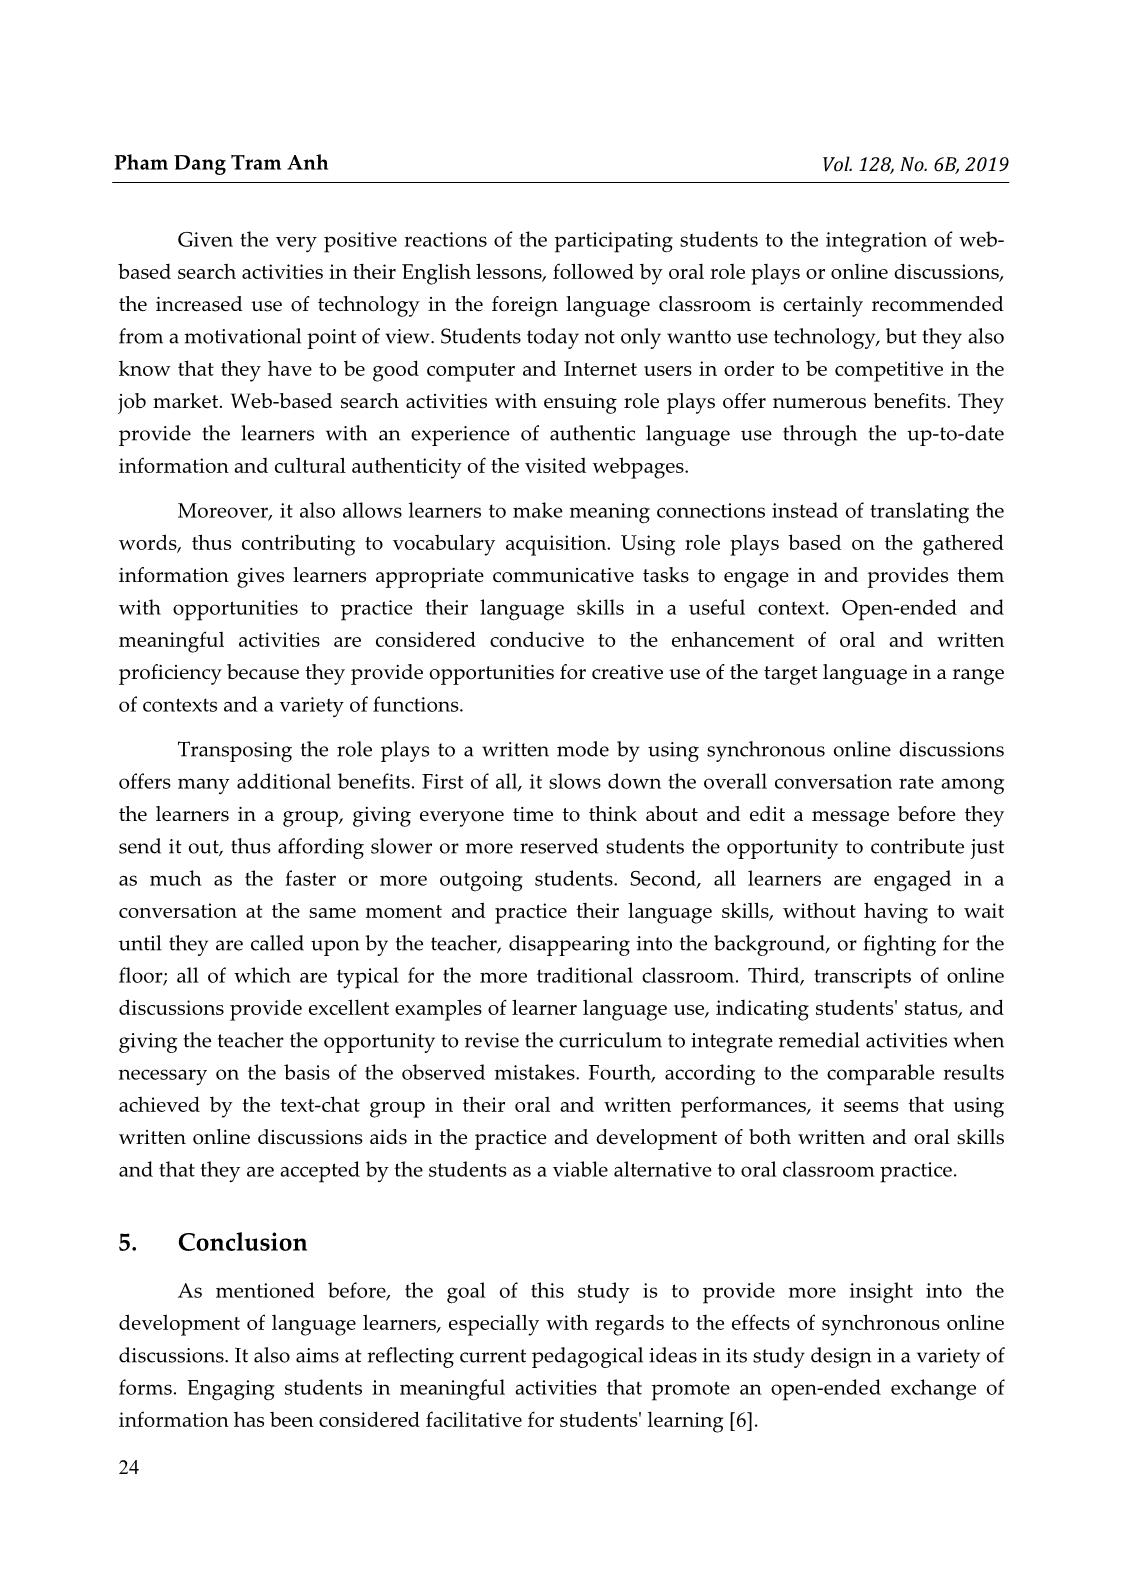 Quantitative analysis of the effect of synchronous online discussions on oral and written language development for efl university students in Vietnam trang 9